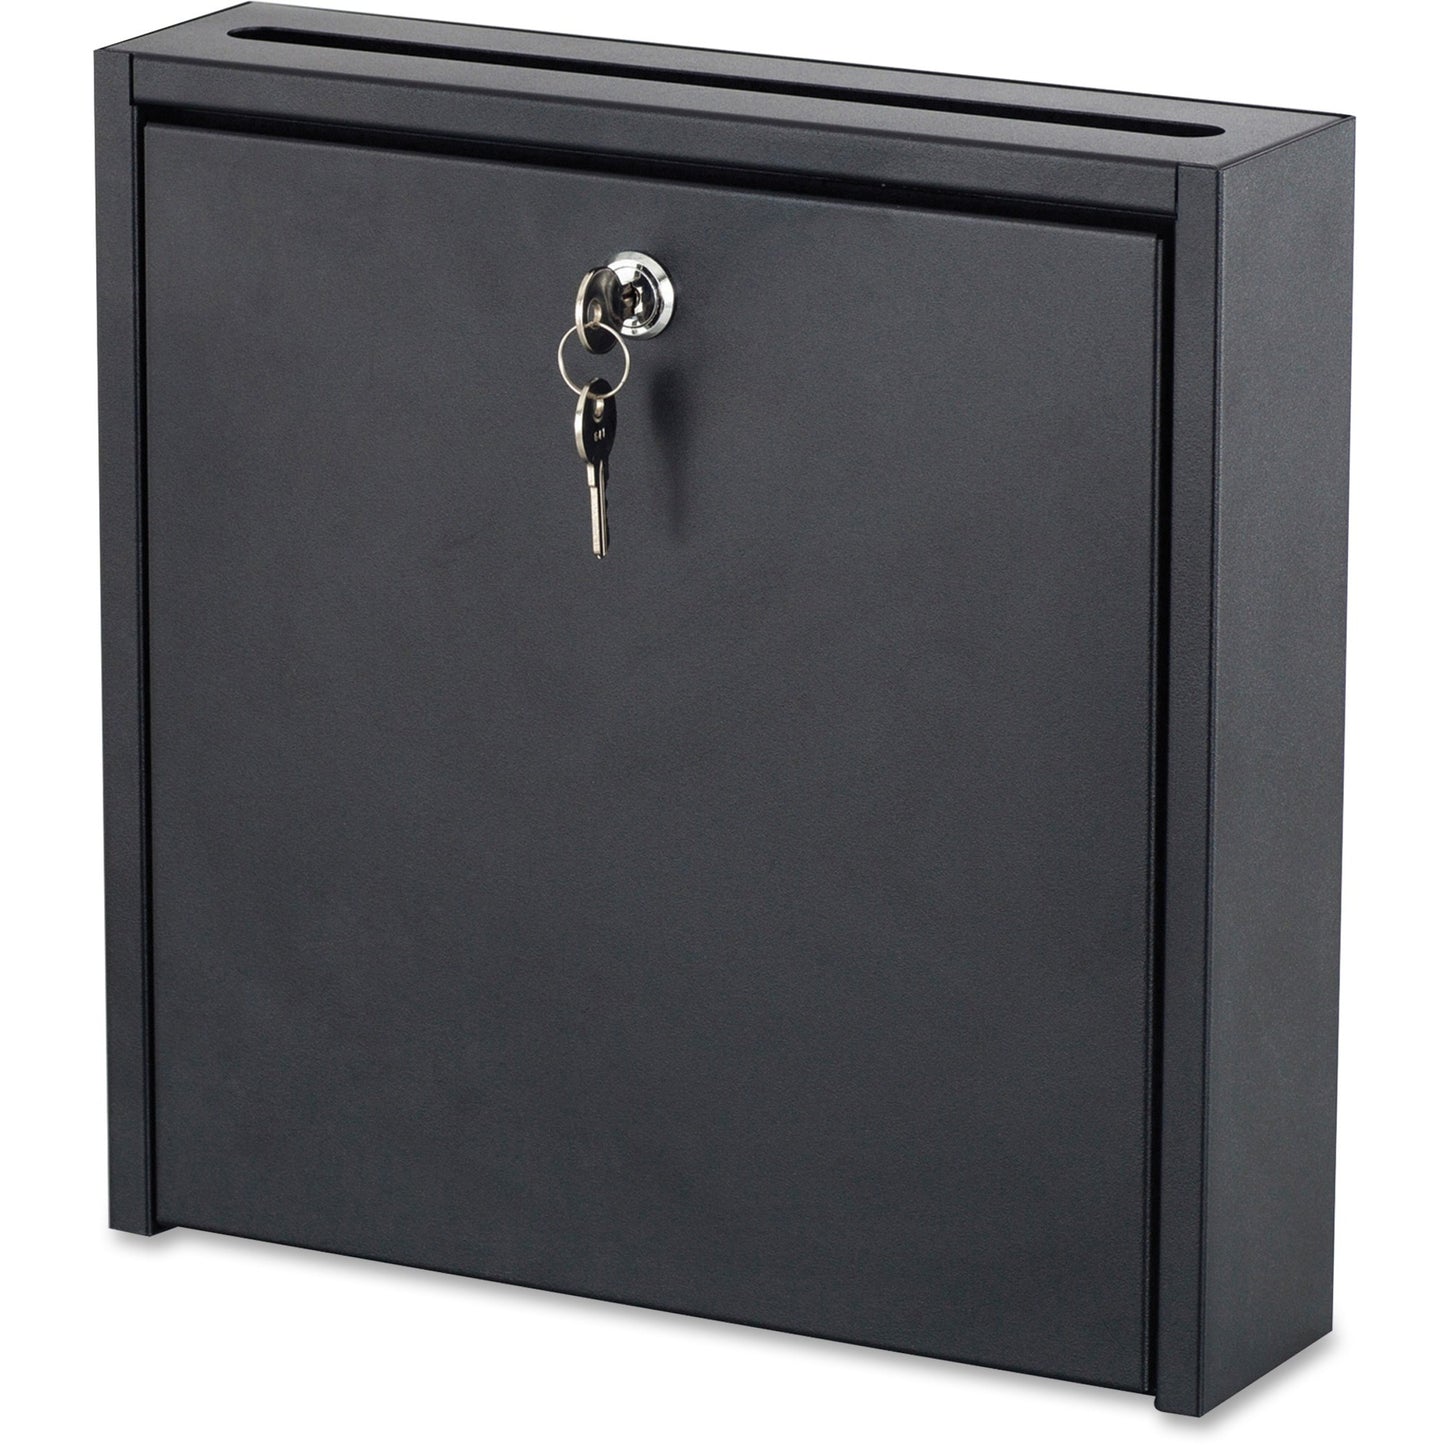 Safco 12 x 12" Wall-Mounted Inter-department Mailbox with Lock